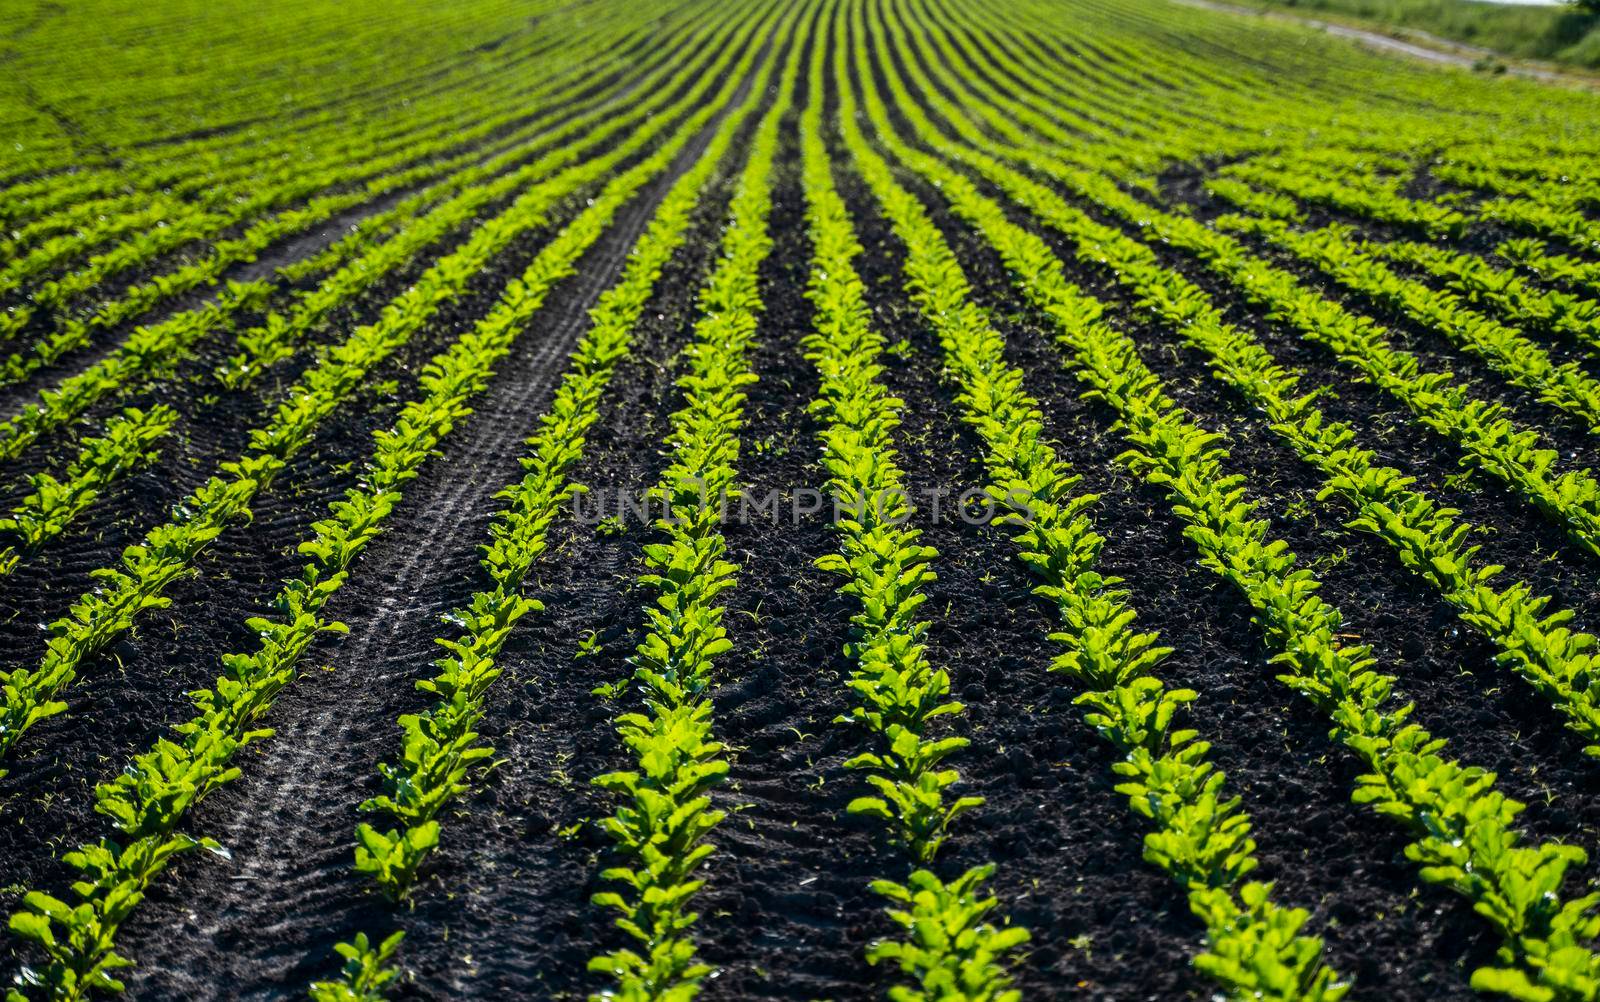 Red beet or sugar beet growing in soil. Fresh green leaves of beetroot. Row of green young beet leaves growth in organic farm. Close-up agricultural beet plantation